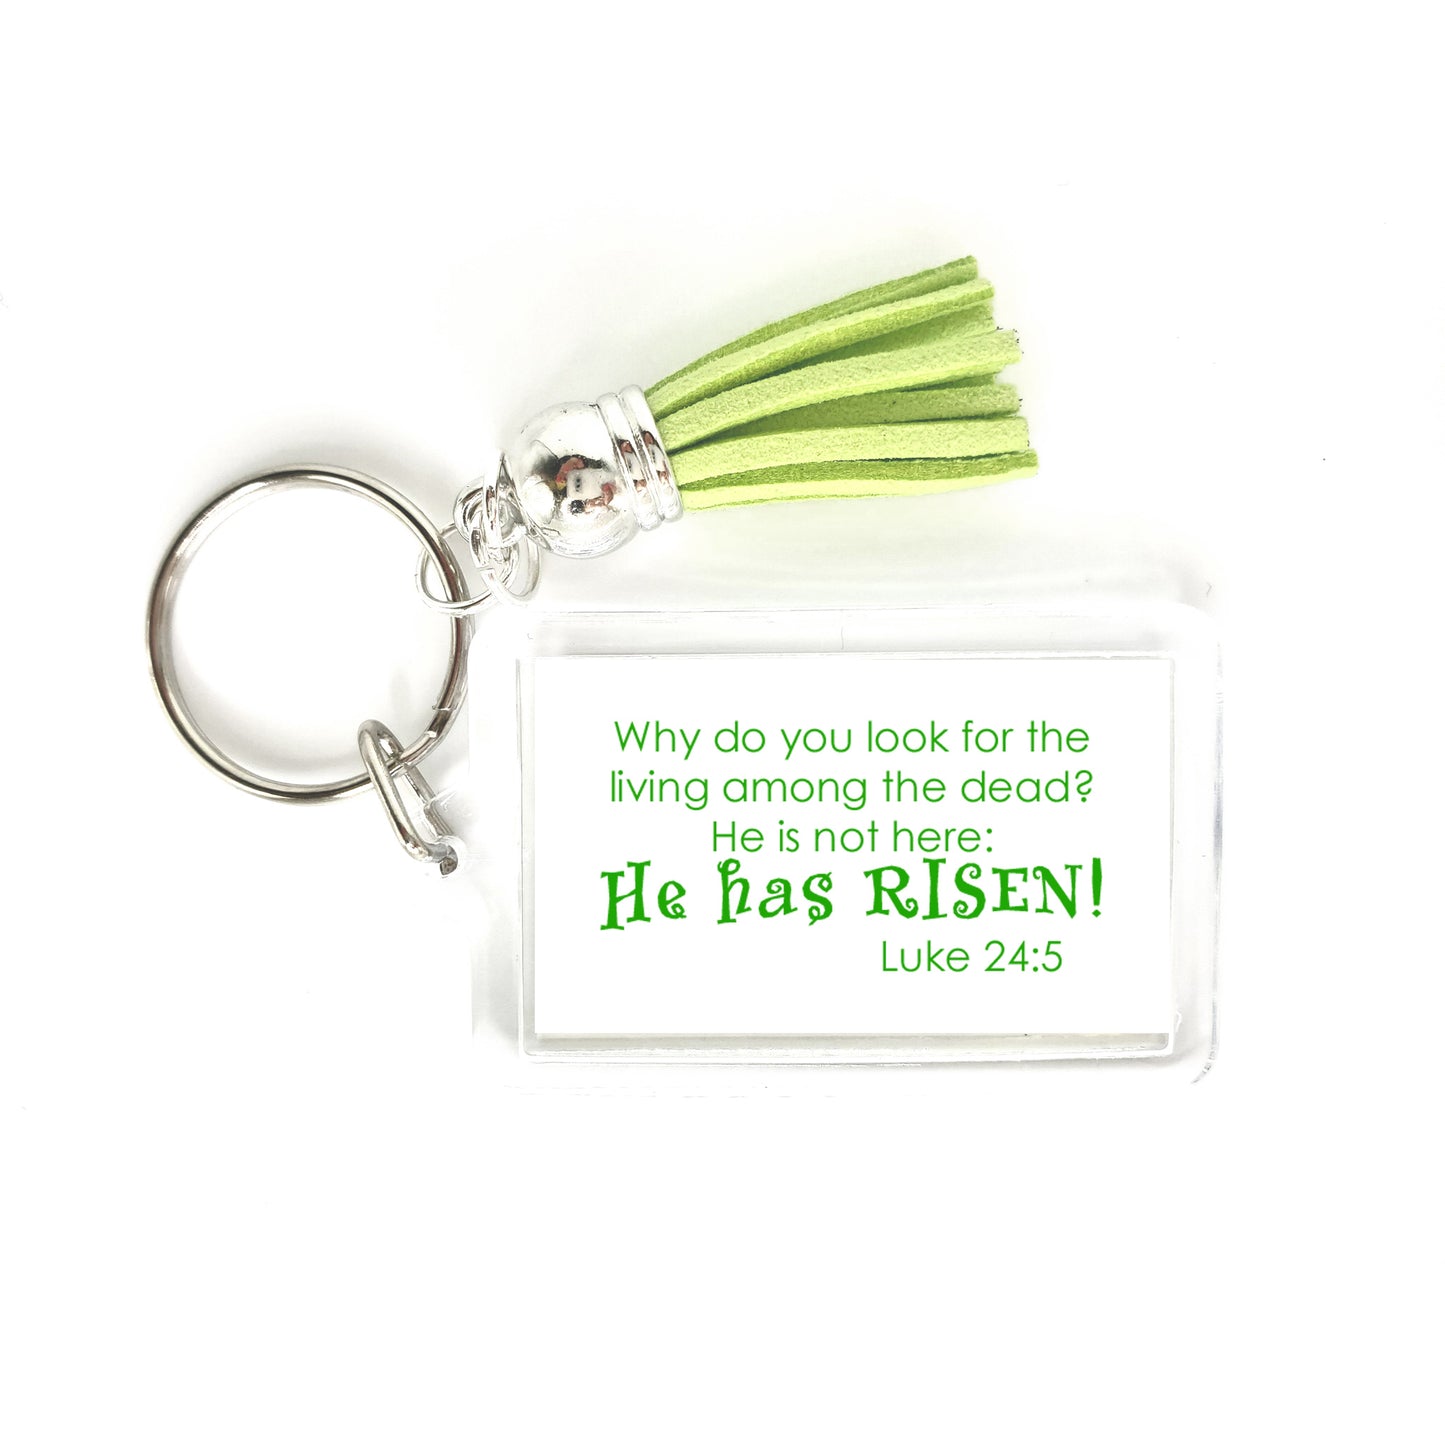 Lively Green - Jeweled Cross Keyring